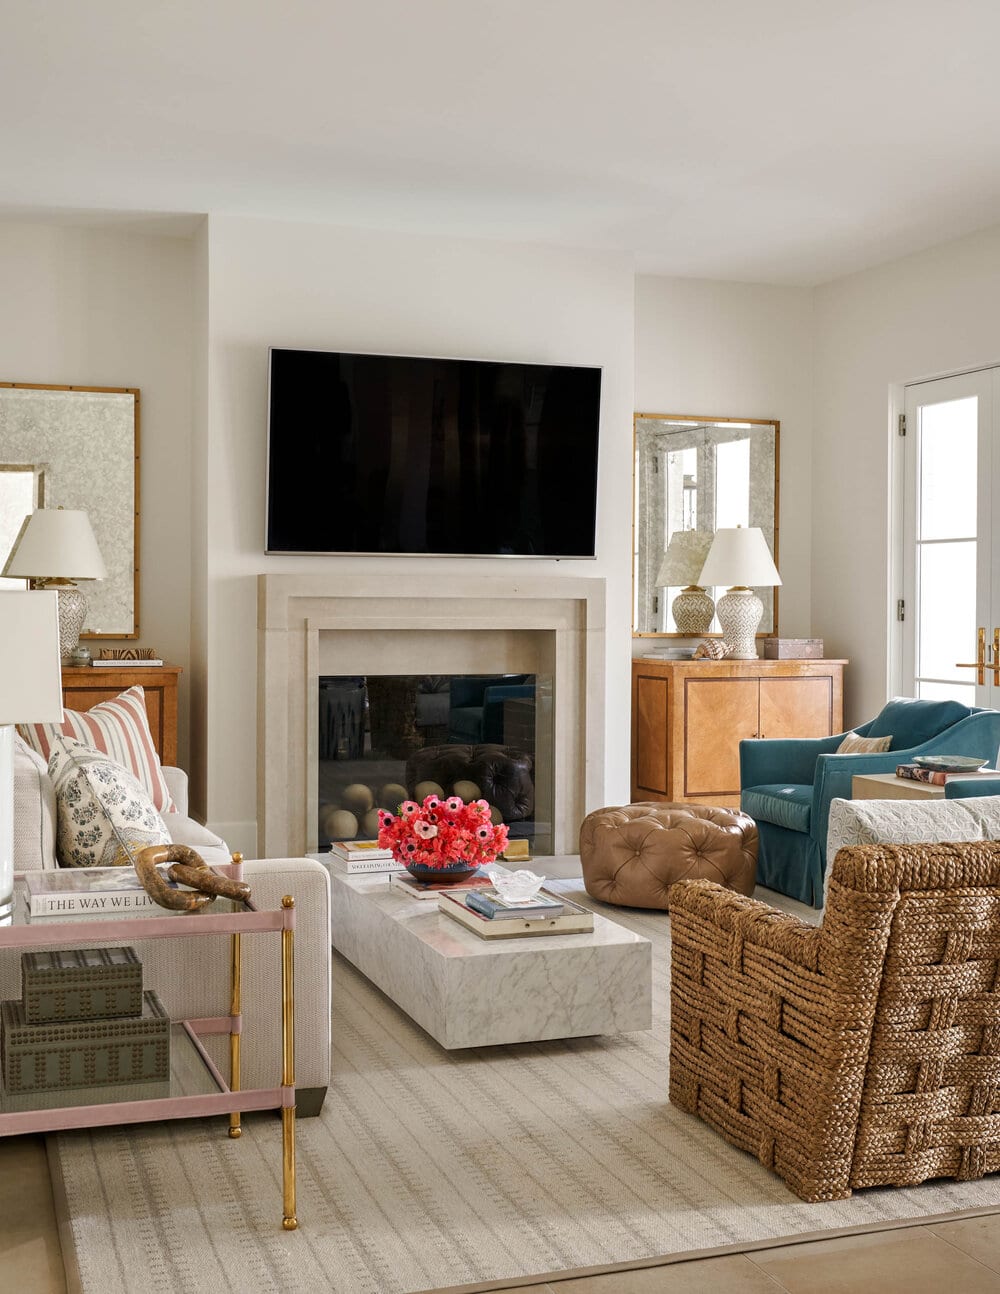 Mary Beth Wagner family room with tv over fireplace mantel